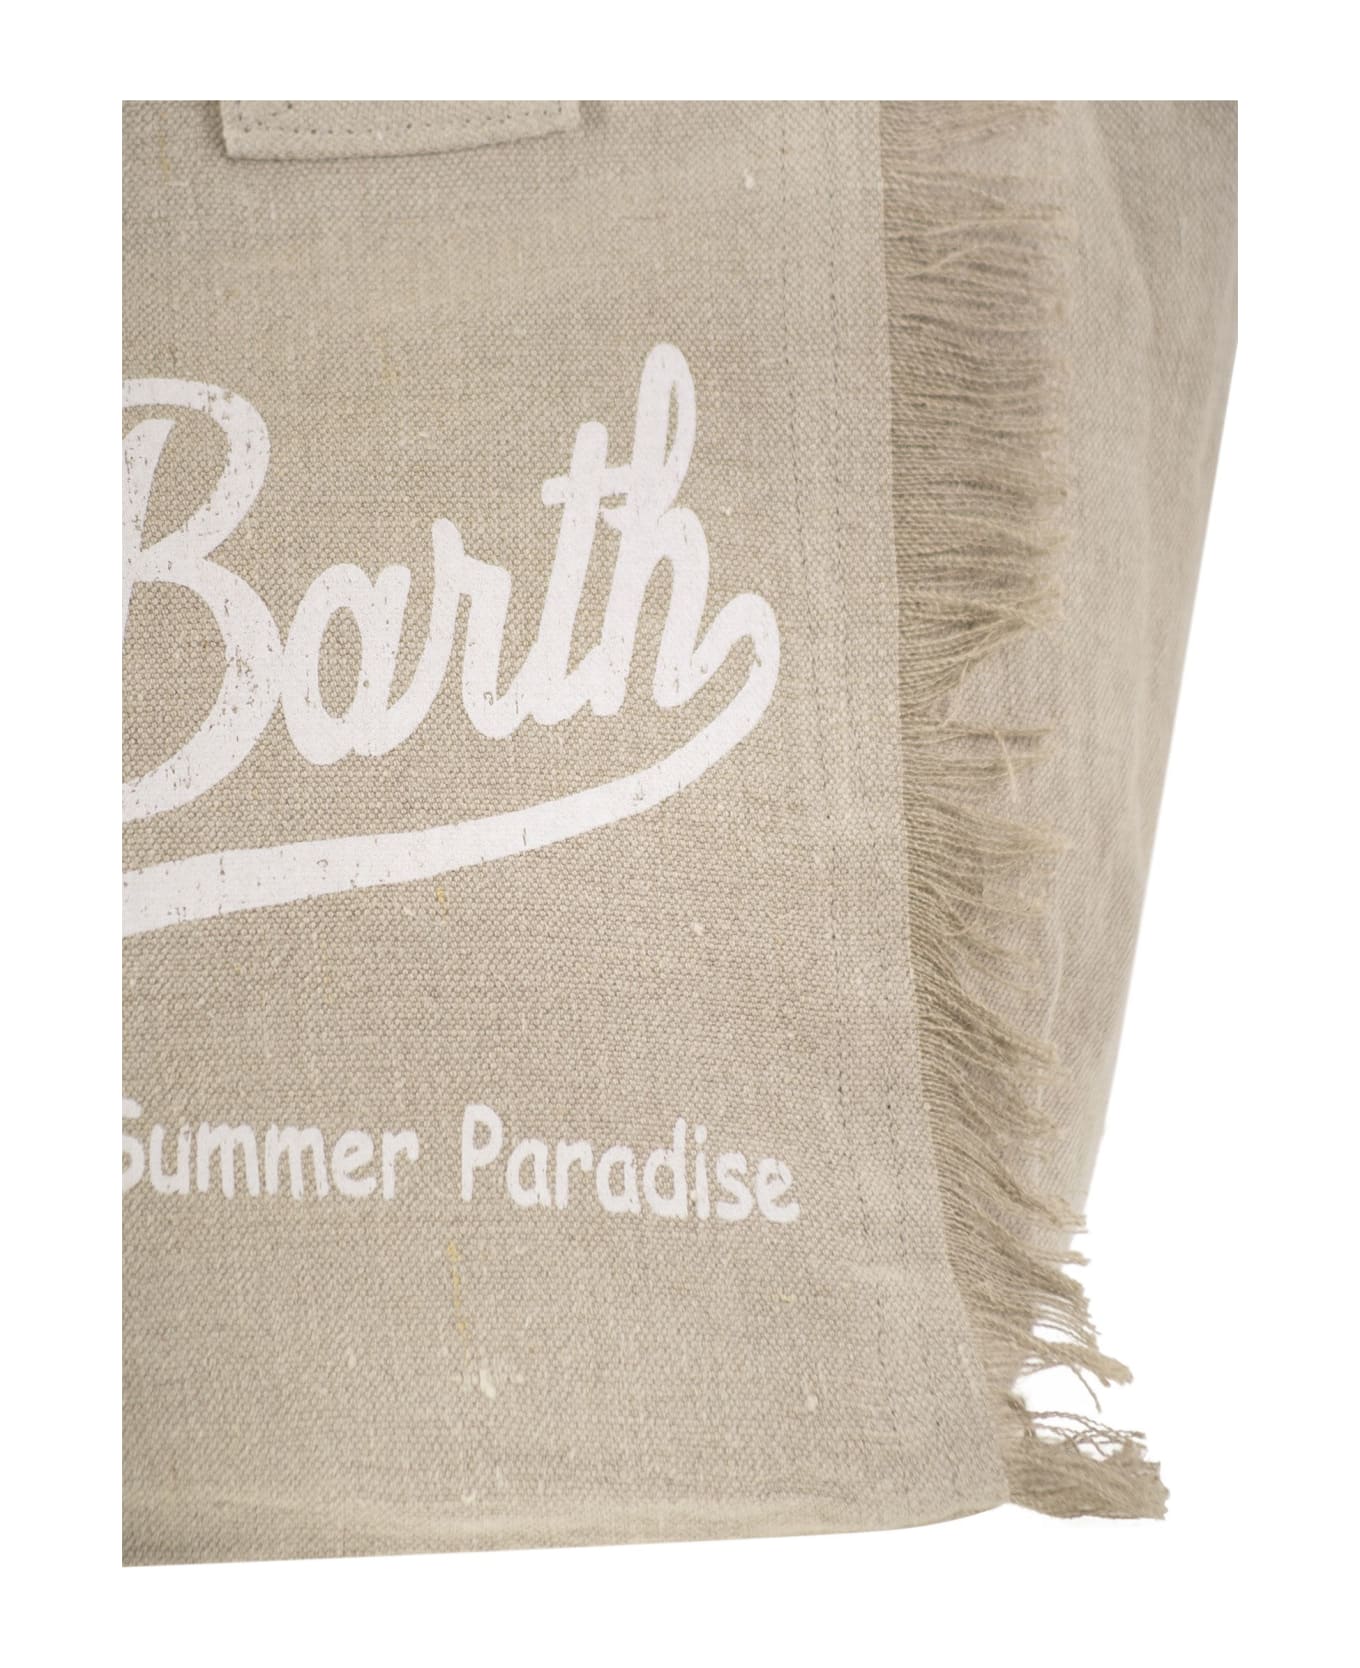 MC2 Saint Barth Vanity - Linen Tote Bag With Embroidery - Beige トートバッグ